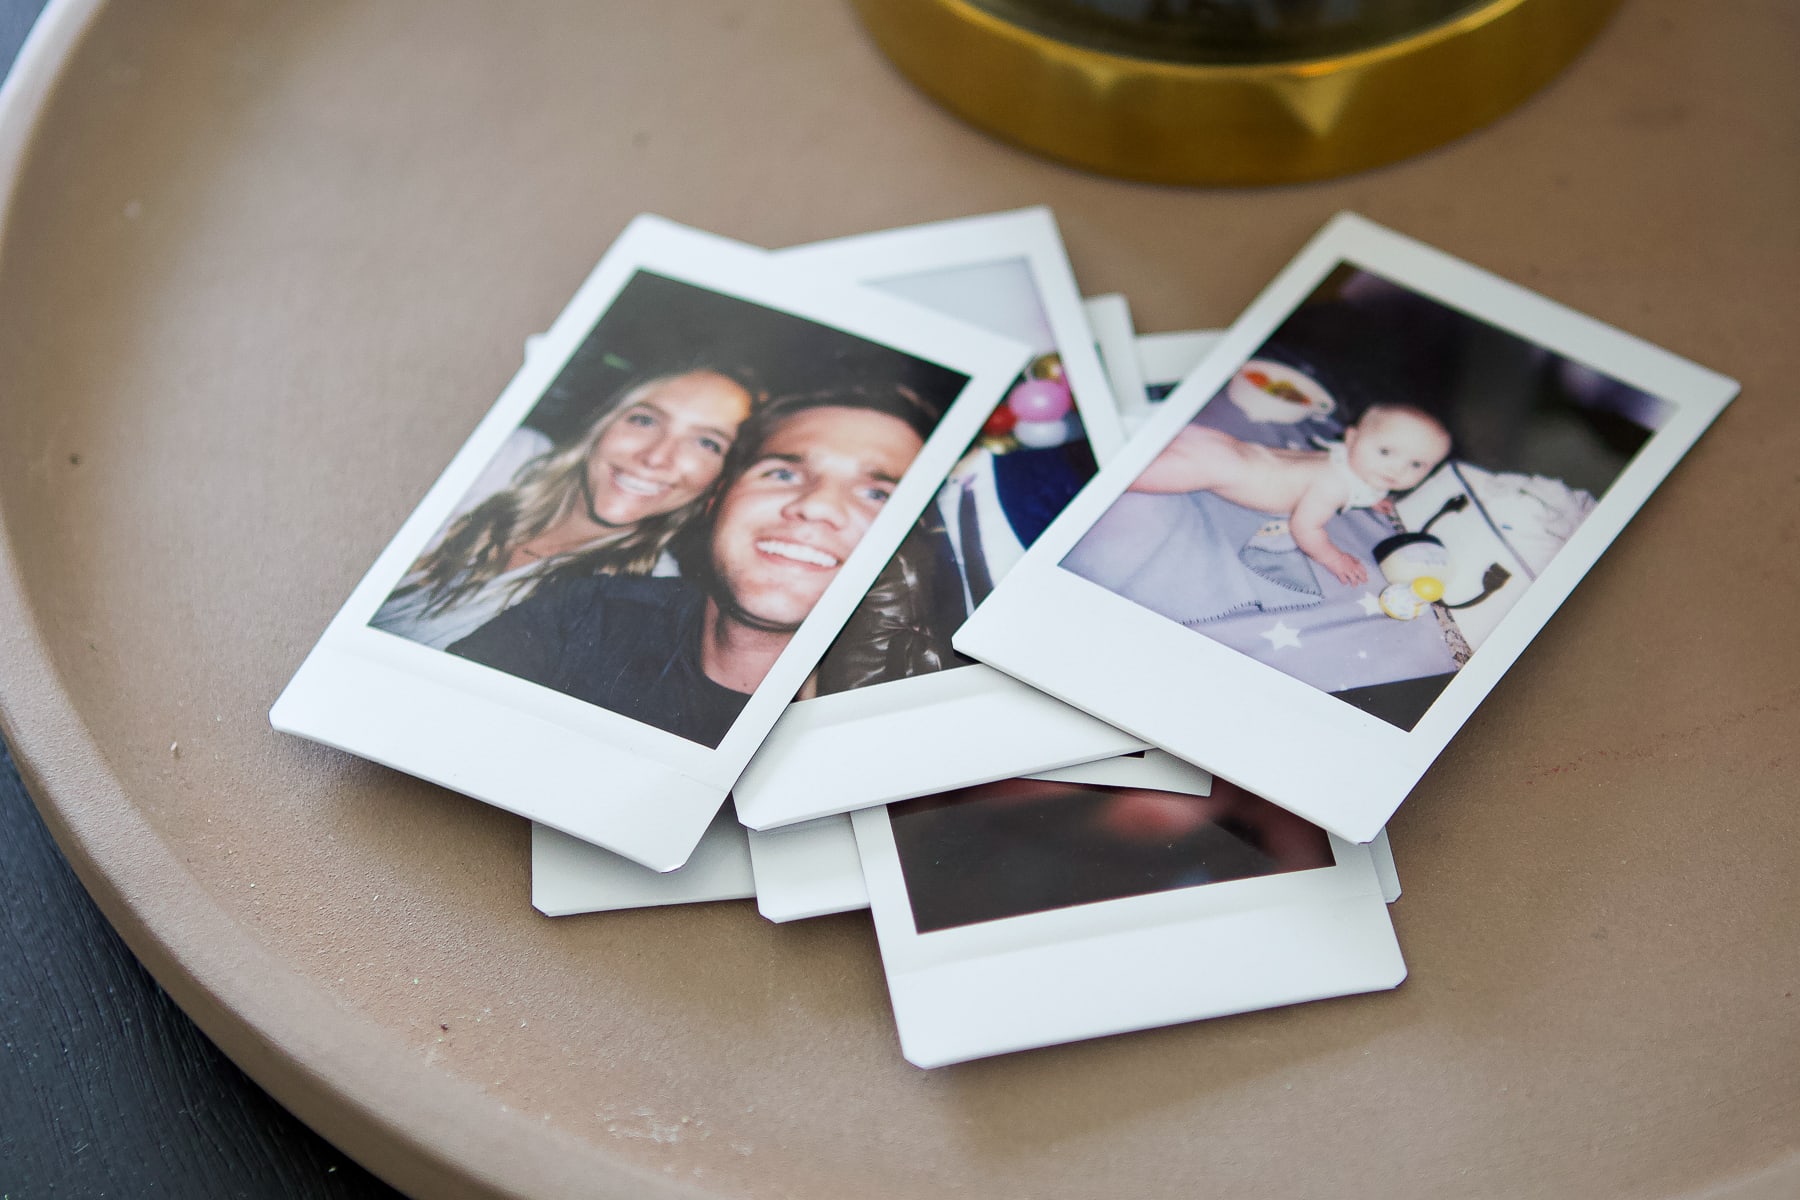 Add Polaroid pictures to your table